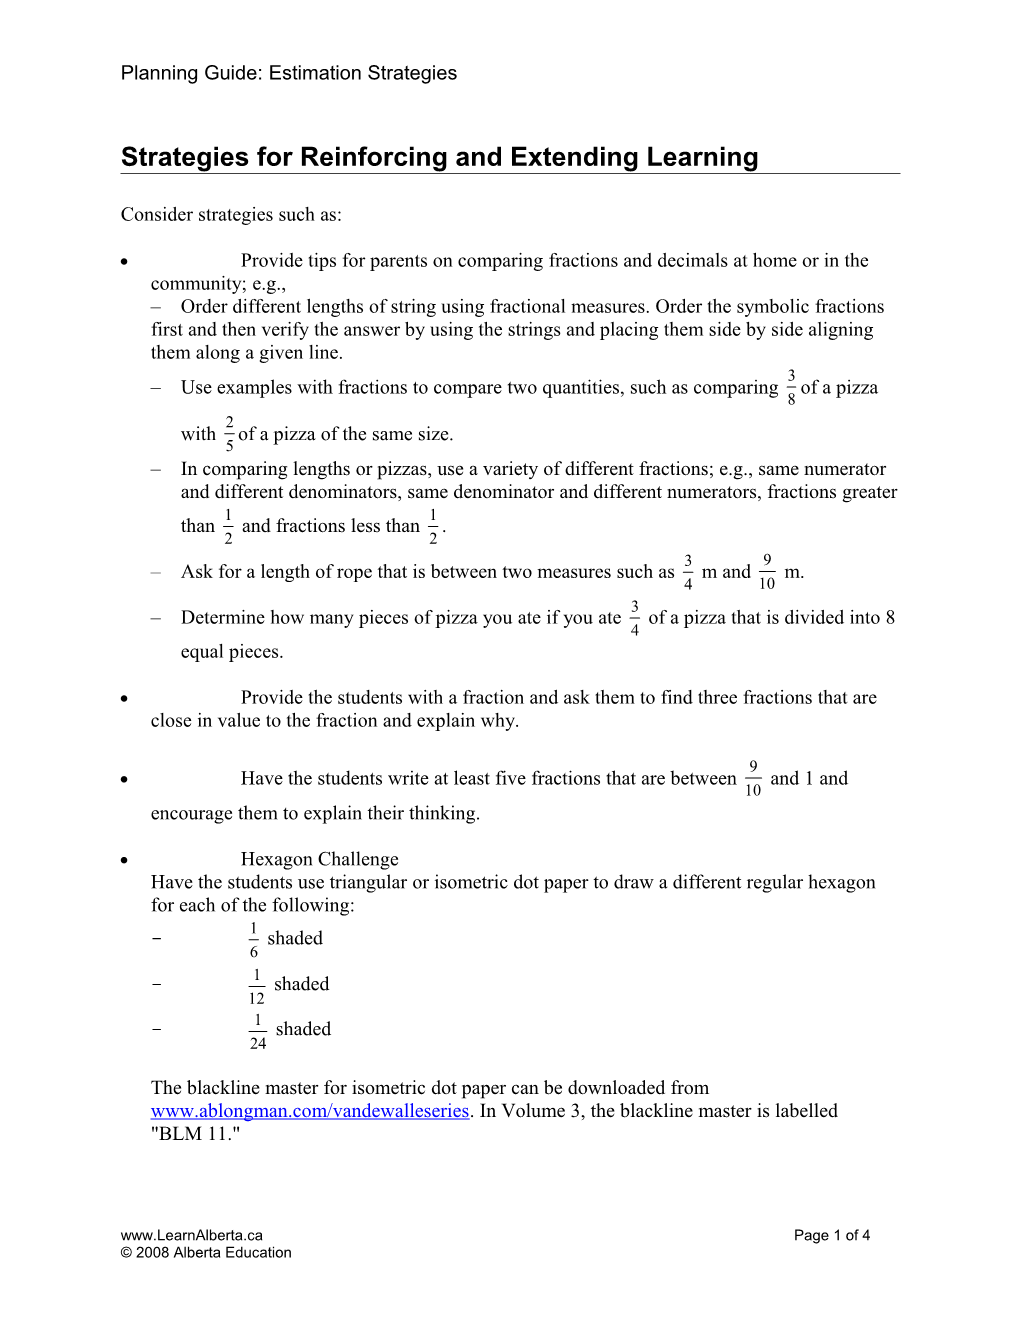 Strategies for Reinforcing and Extending Learning s1